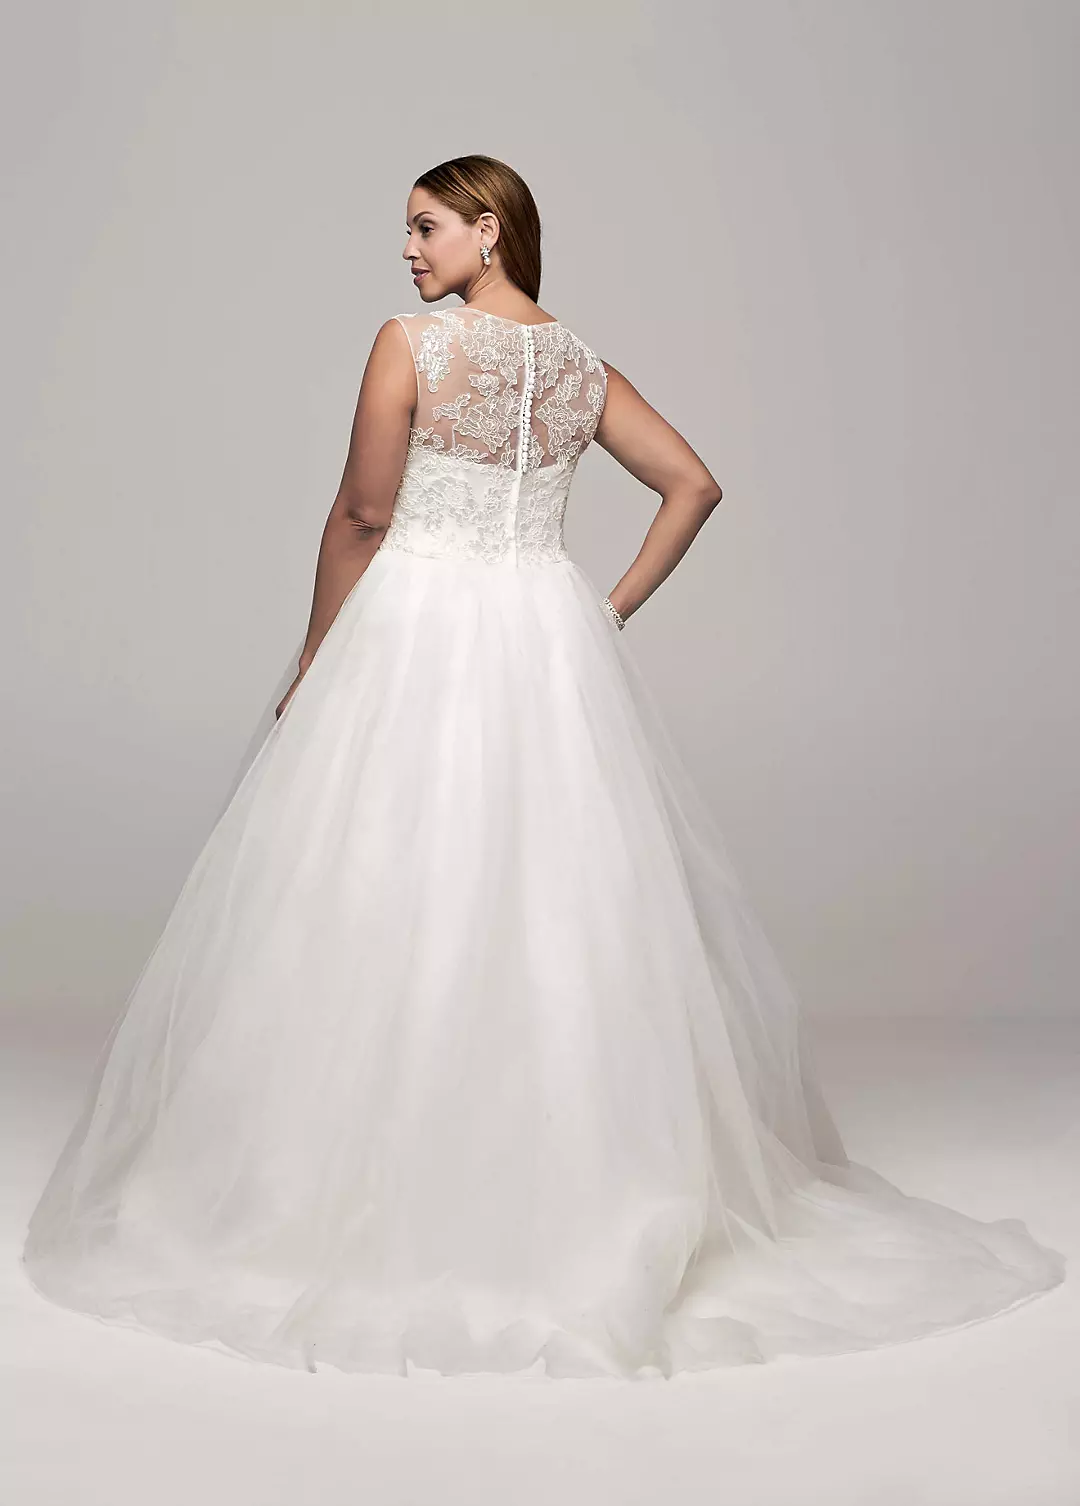 Cap Sleeve Tulle Ball Gown with Illusion Neckline Image 2